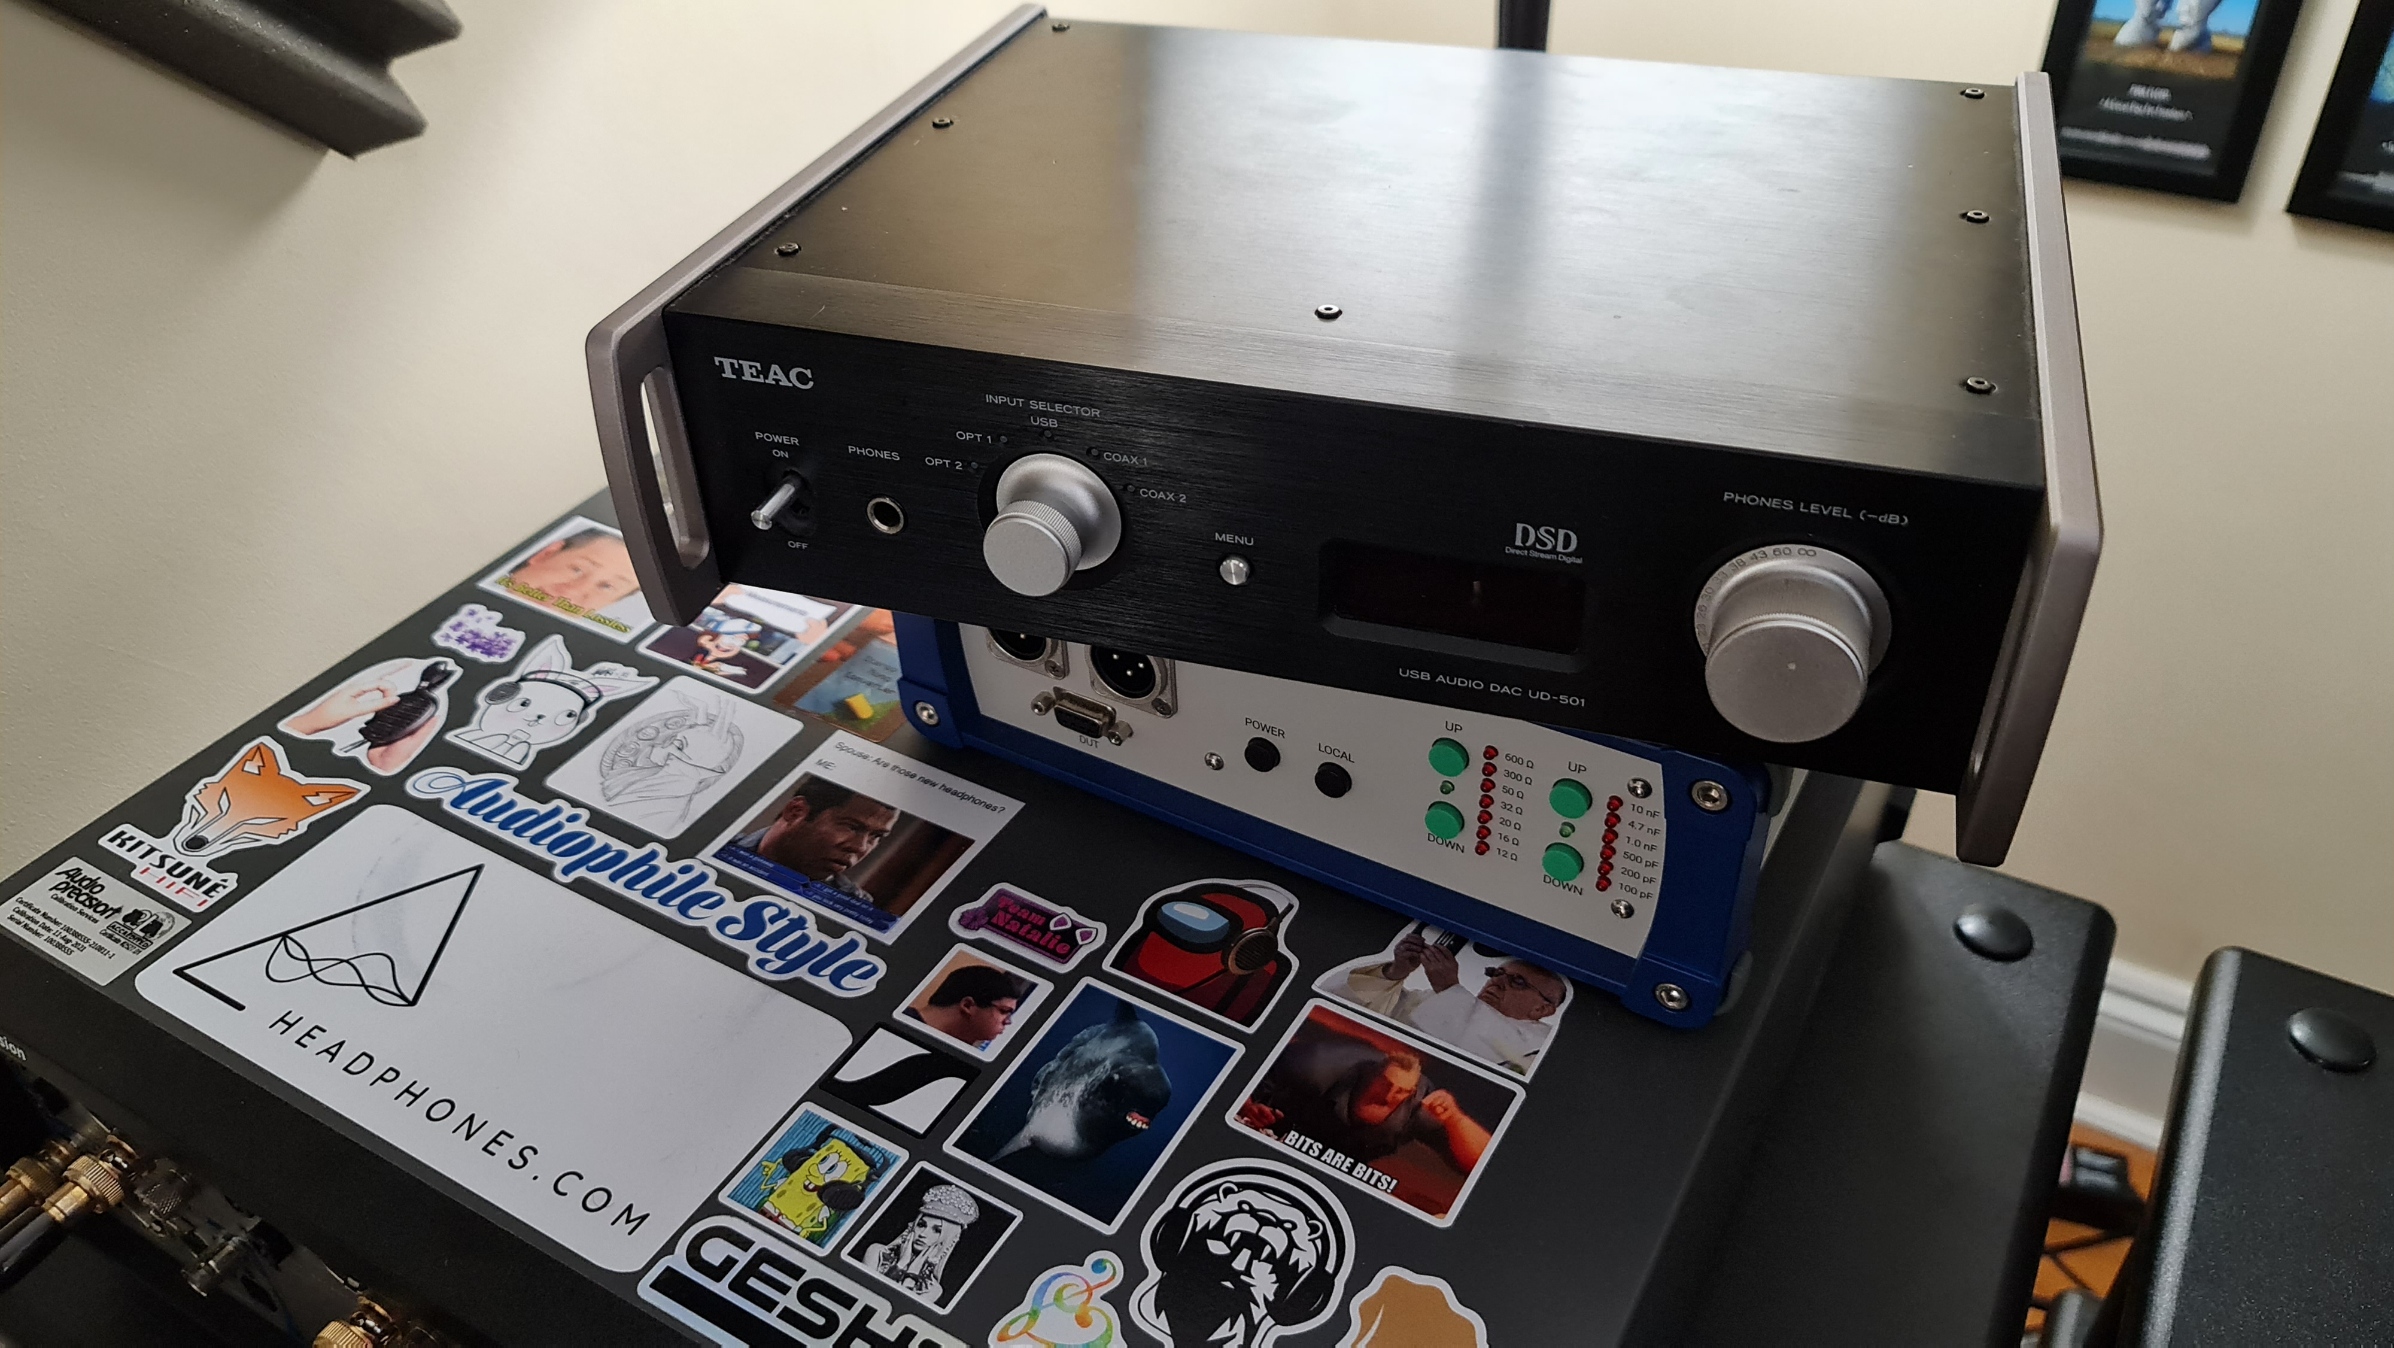 Teac UD501 DAC Review and Measurements - GoldenSound